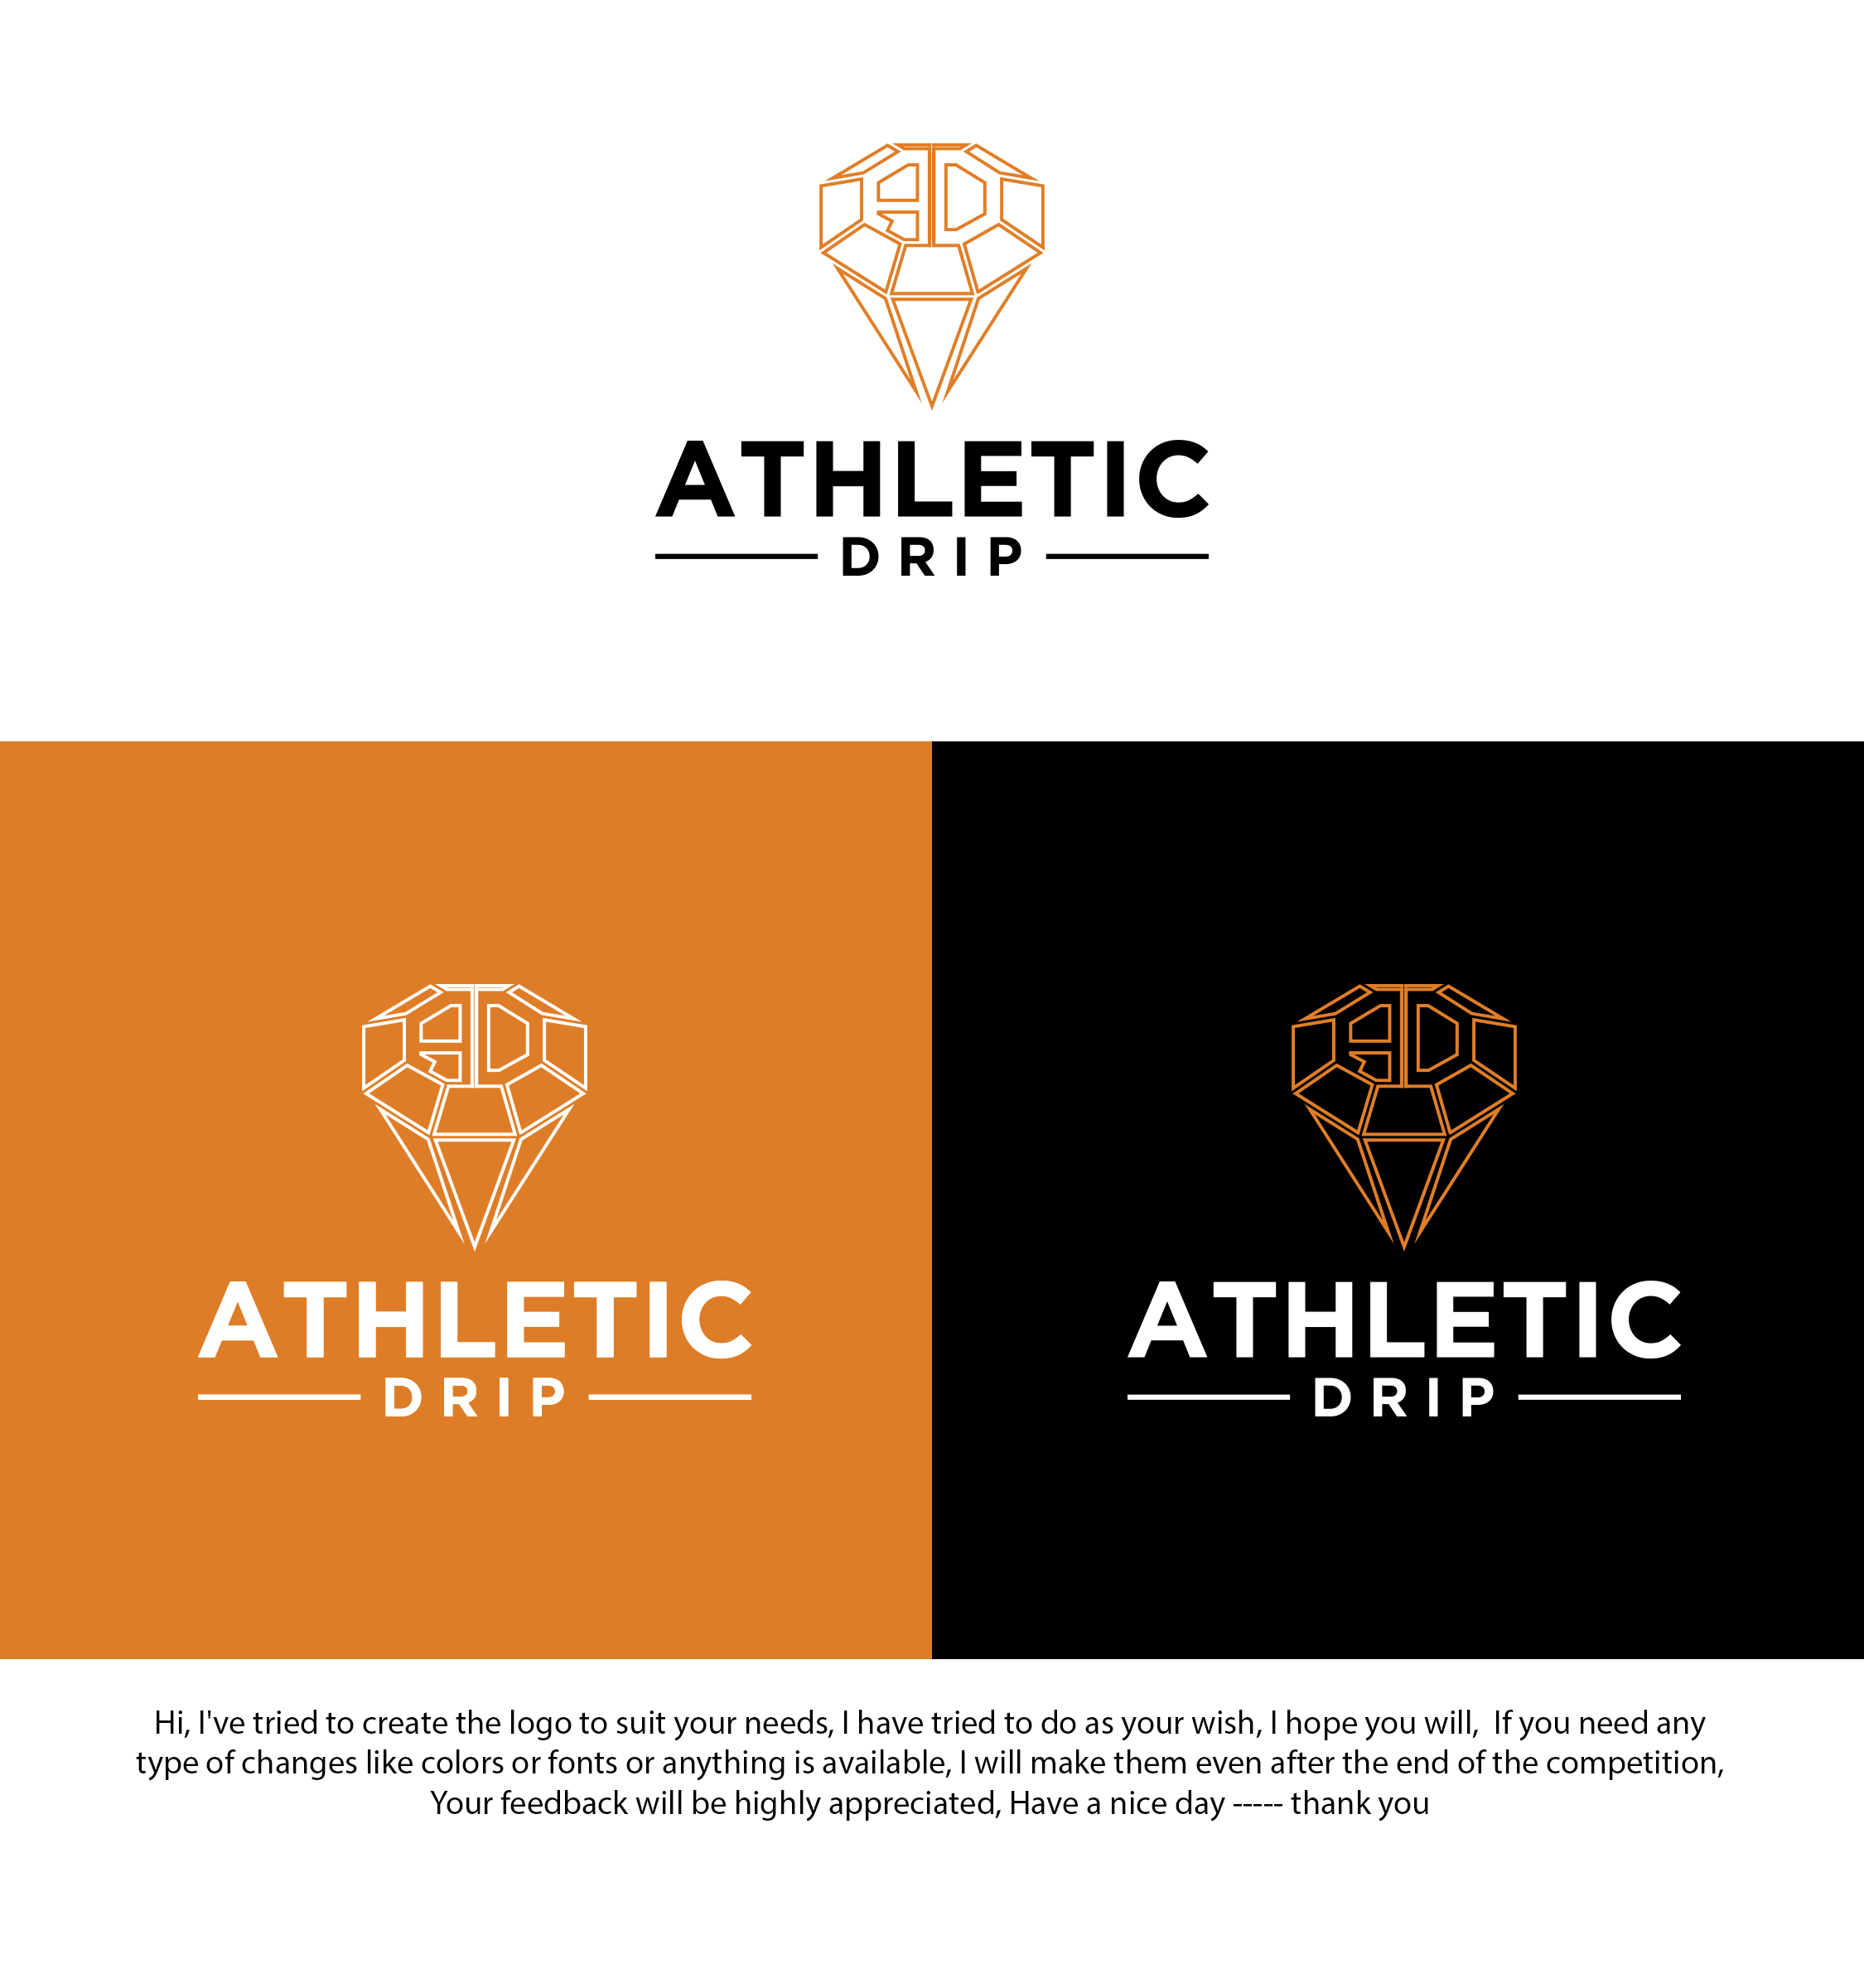 Logo Design Contest for ATHLETIC DRIP | Hatchwise